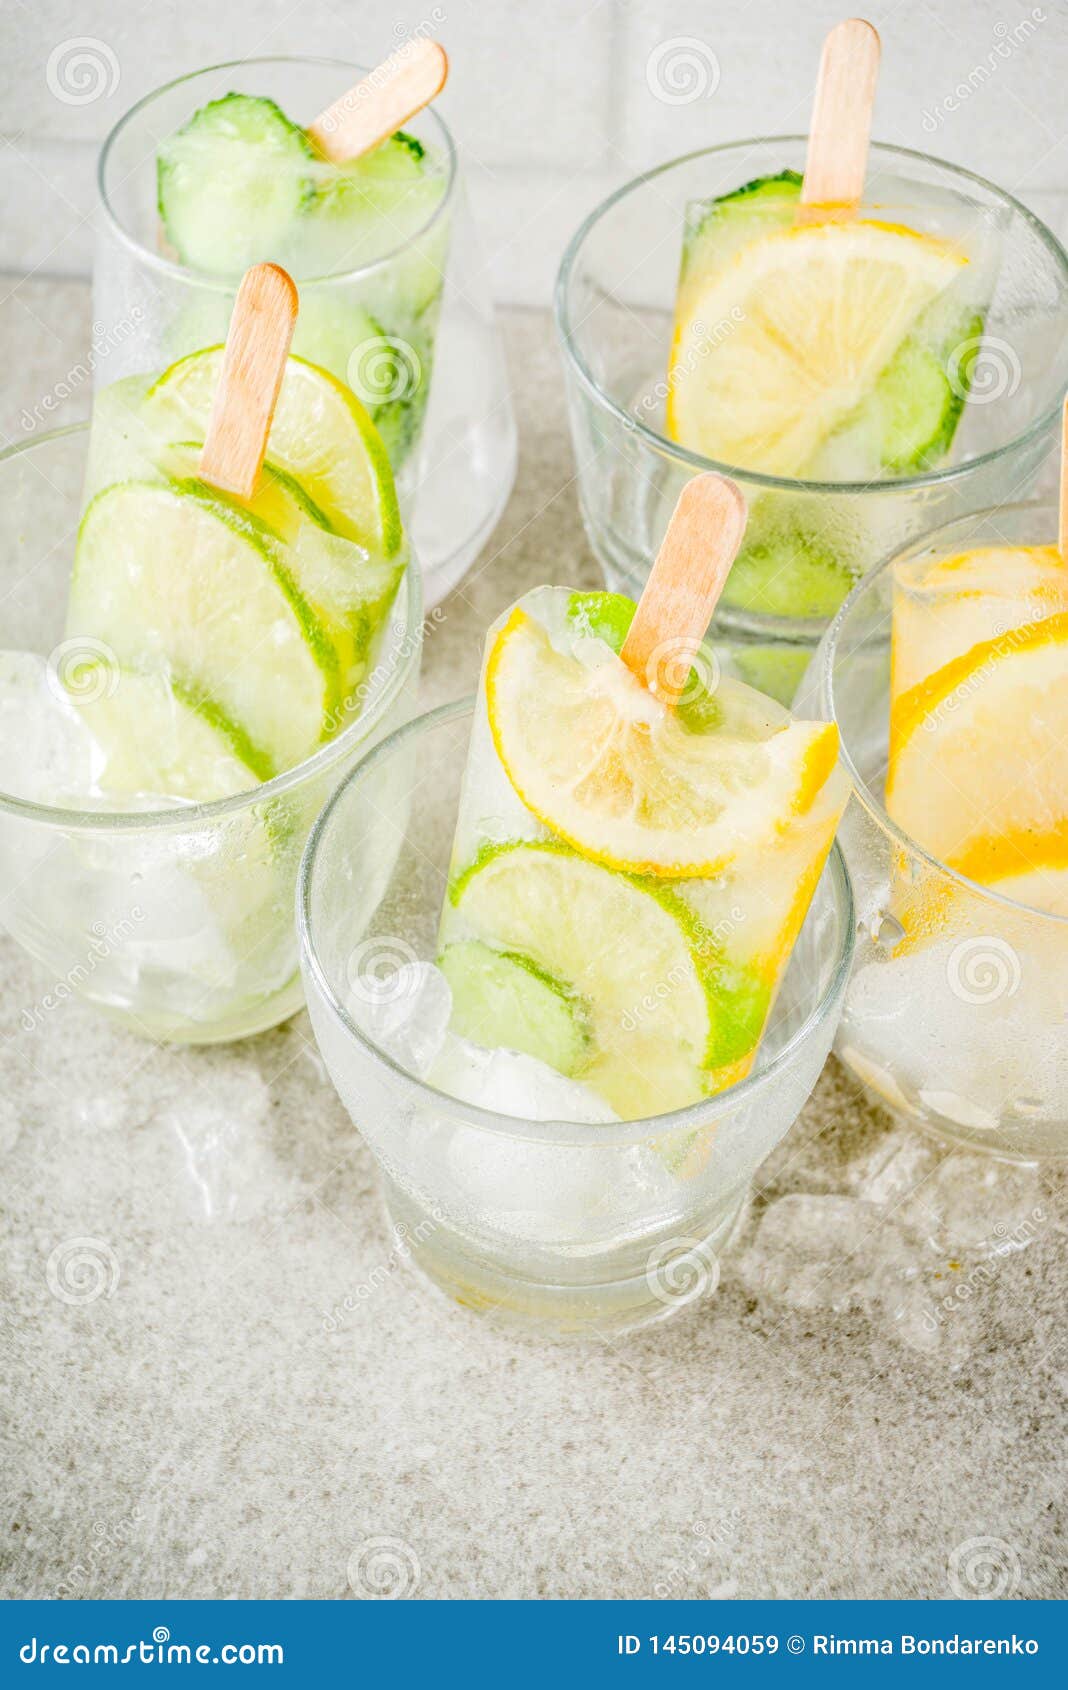 Infused Water Ice Cream Popsicles Stock Image - Image of detox, flower